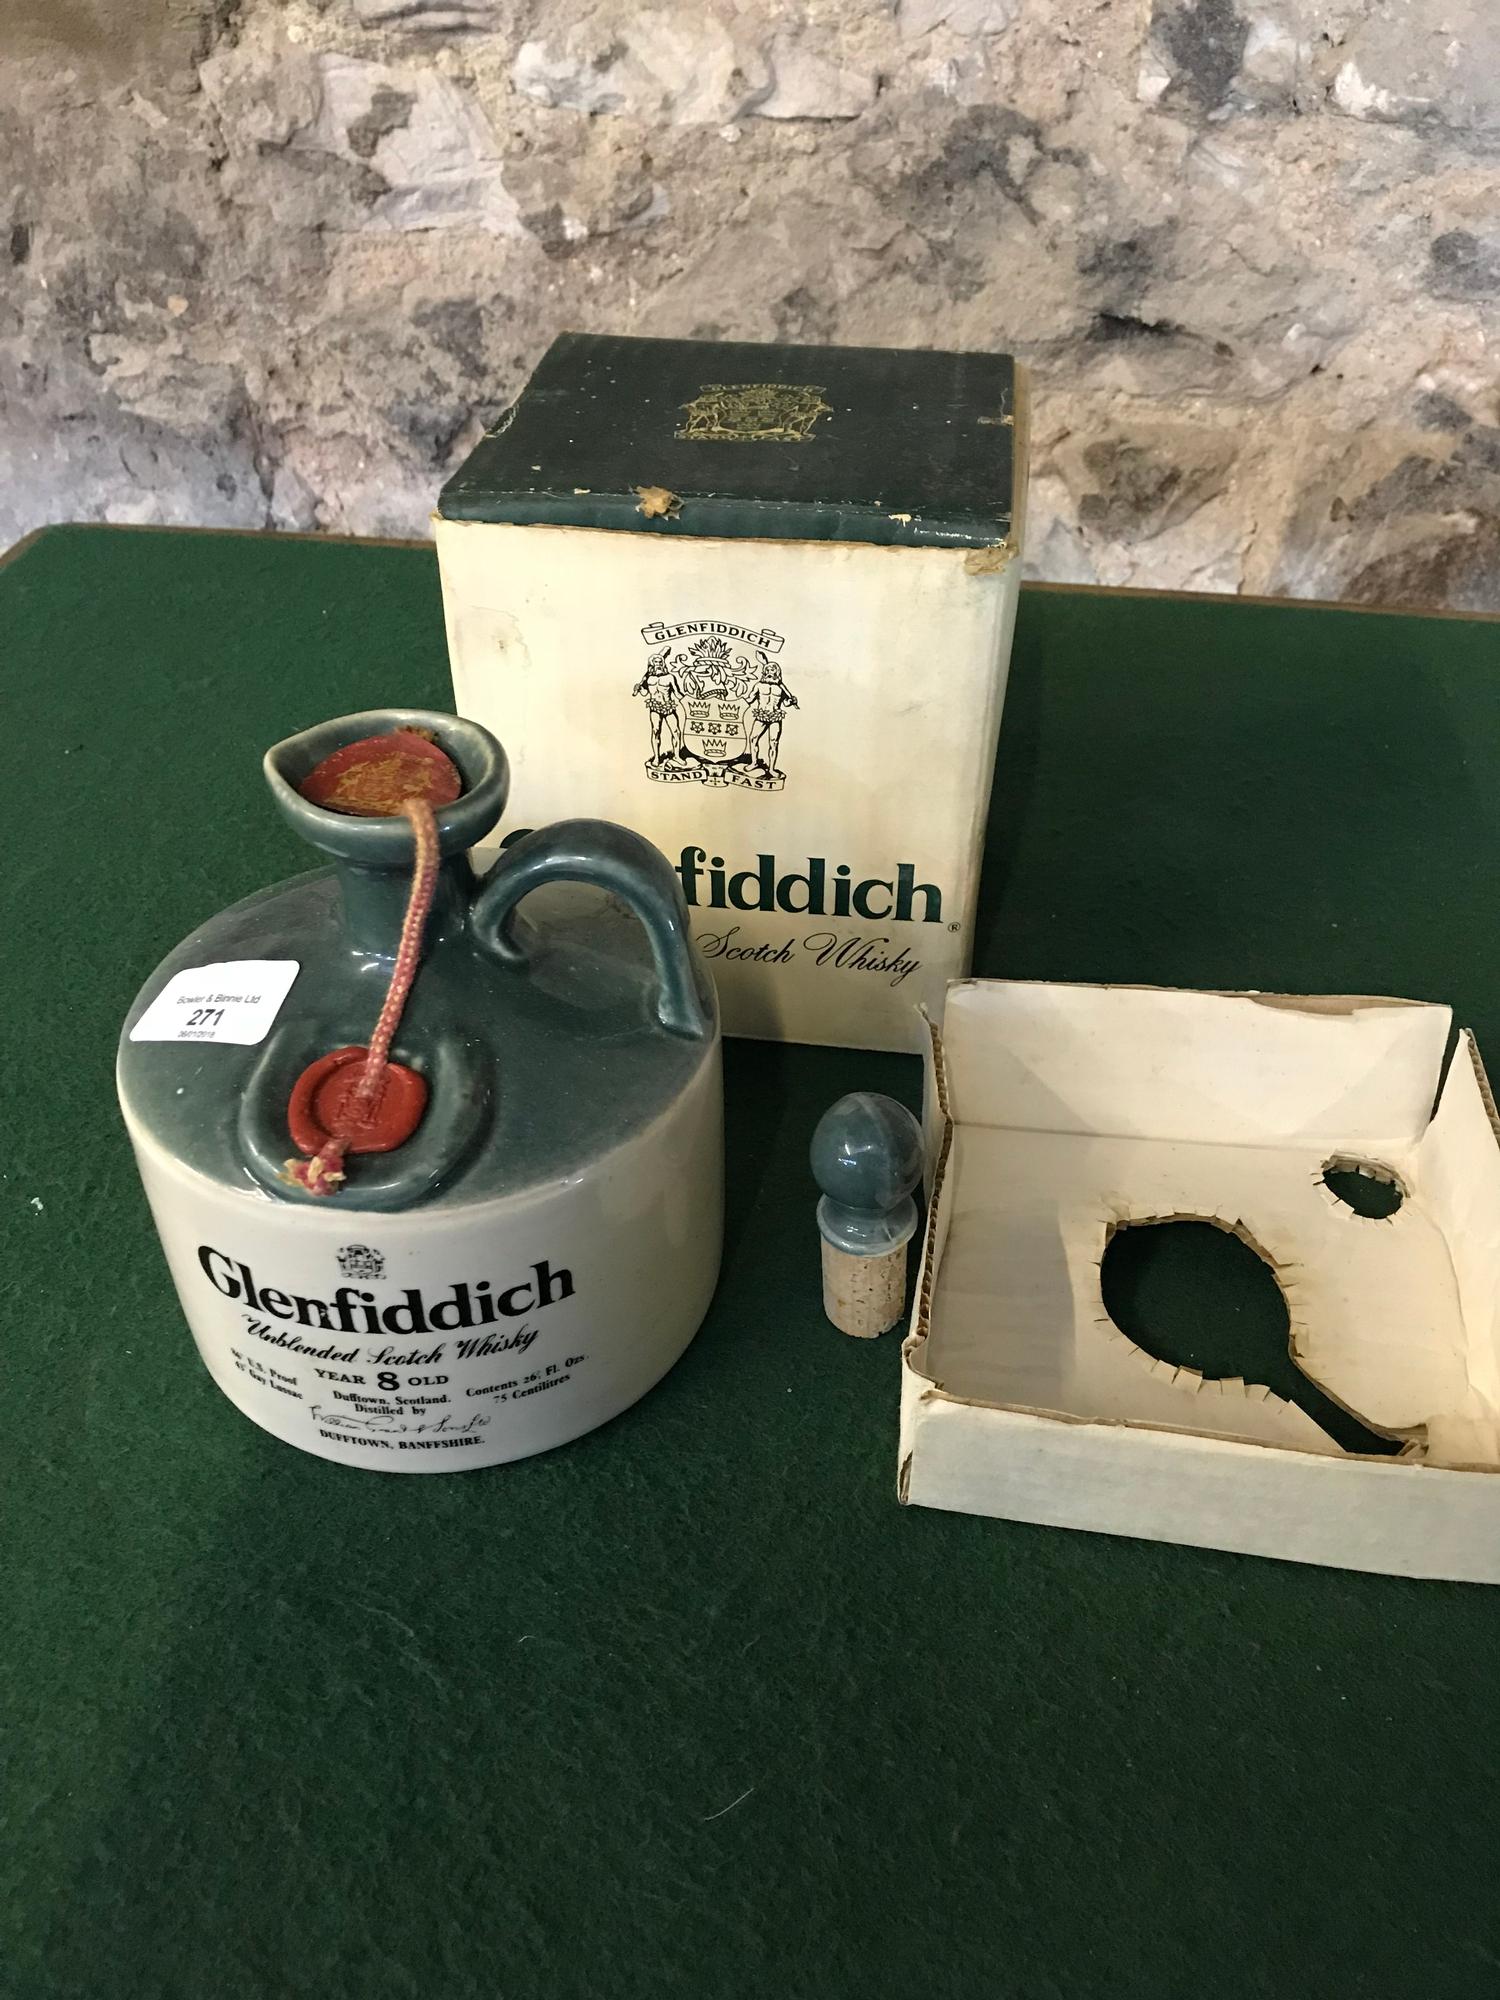 Glenfiddich 8 year old ceramic decanter, unblended Scotch whisky, Full & sealed. 86 US Proof. with